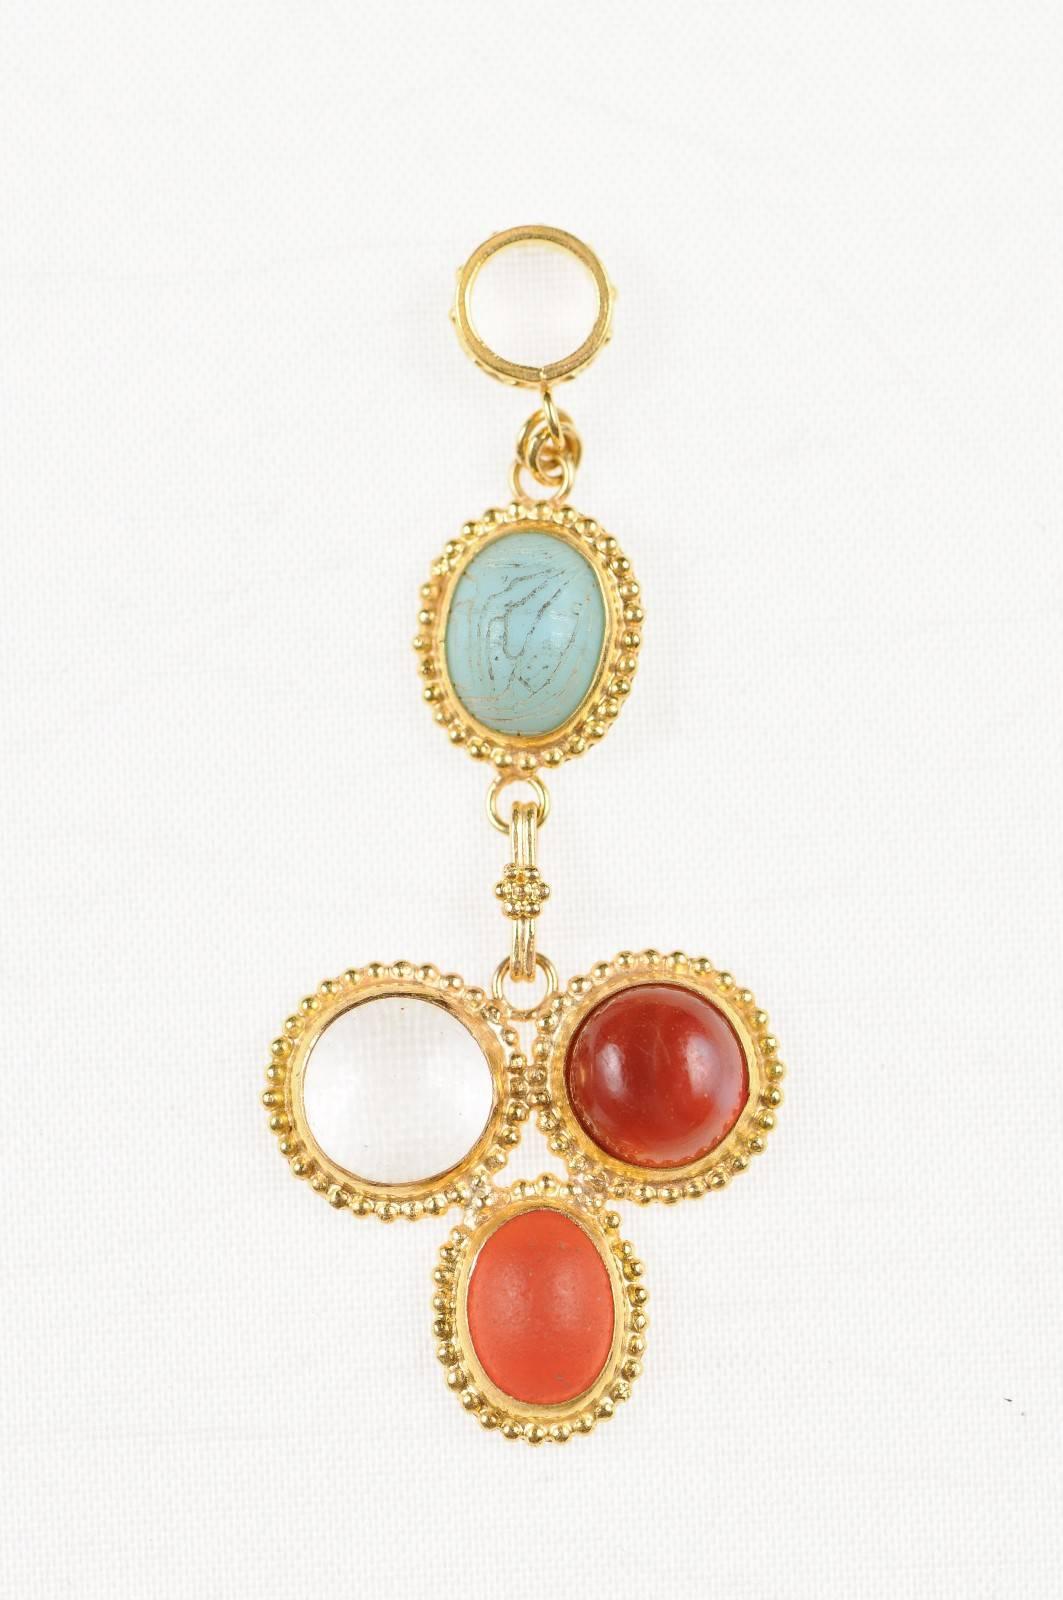 Italian Lovely Multicolored Drop Necklace Pendant of Old Roman Glass '400 AD-500 AD' For Sale